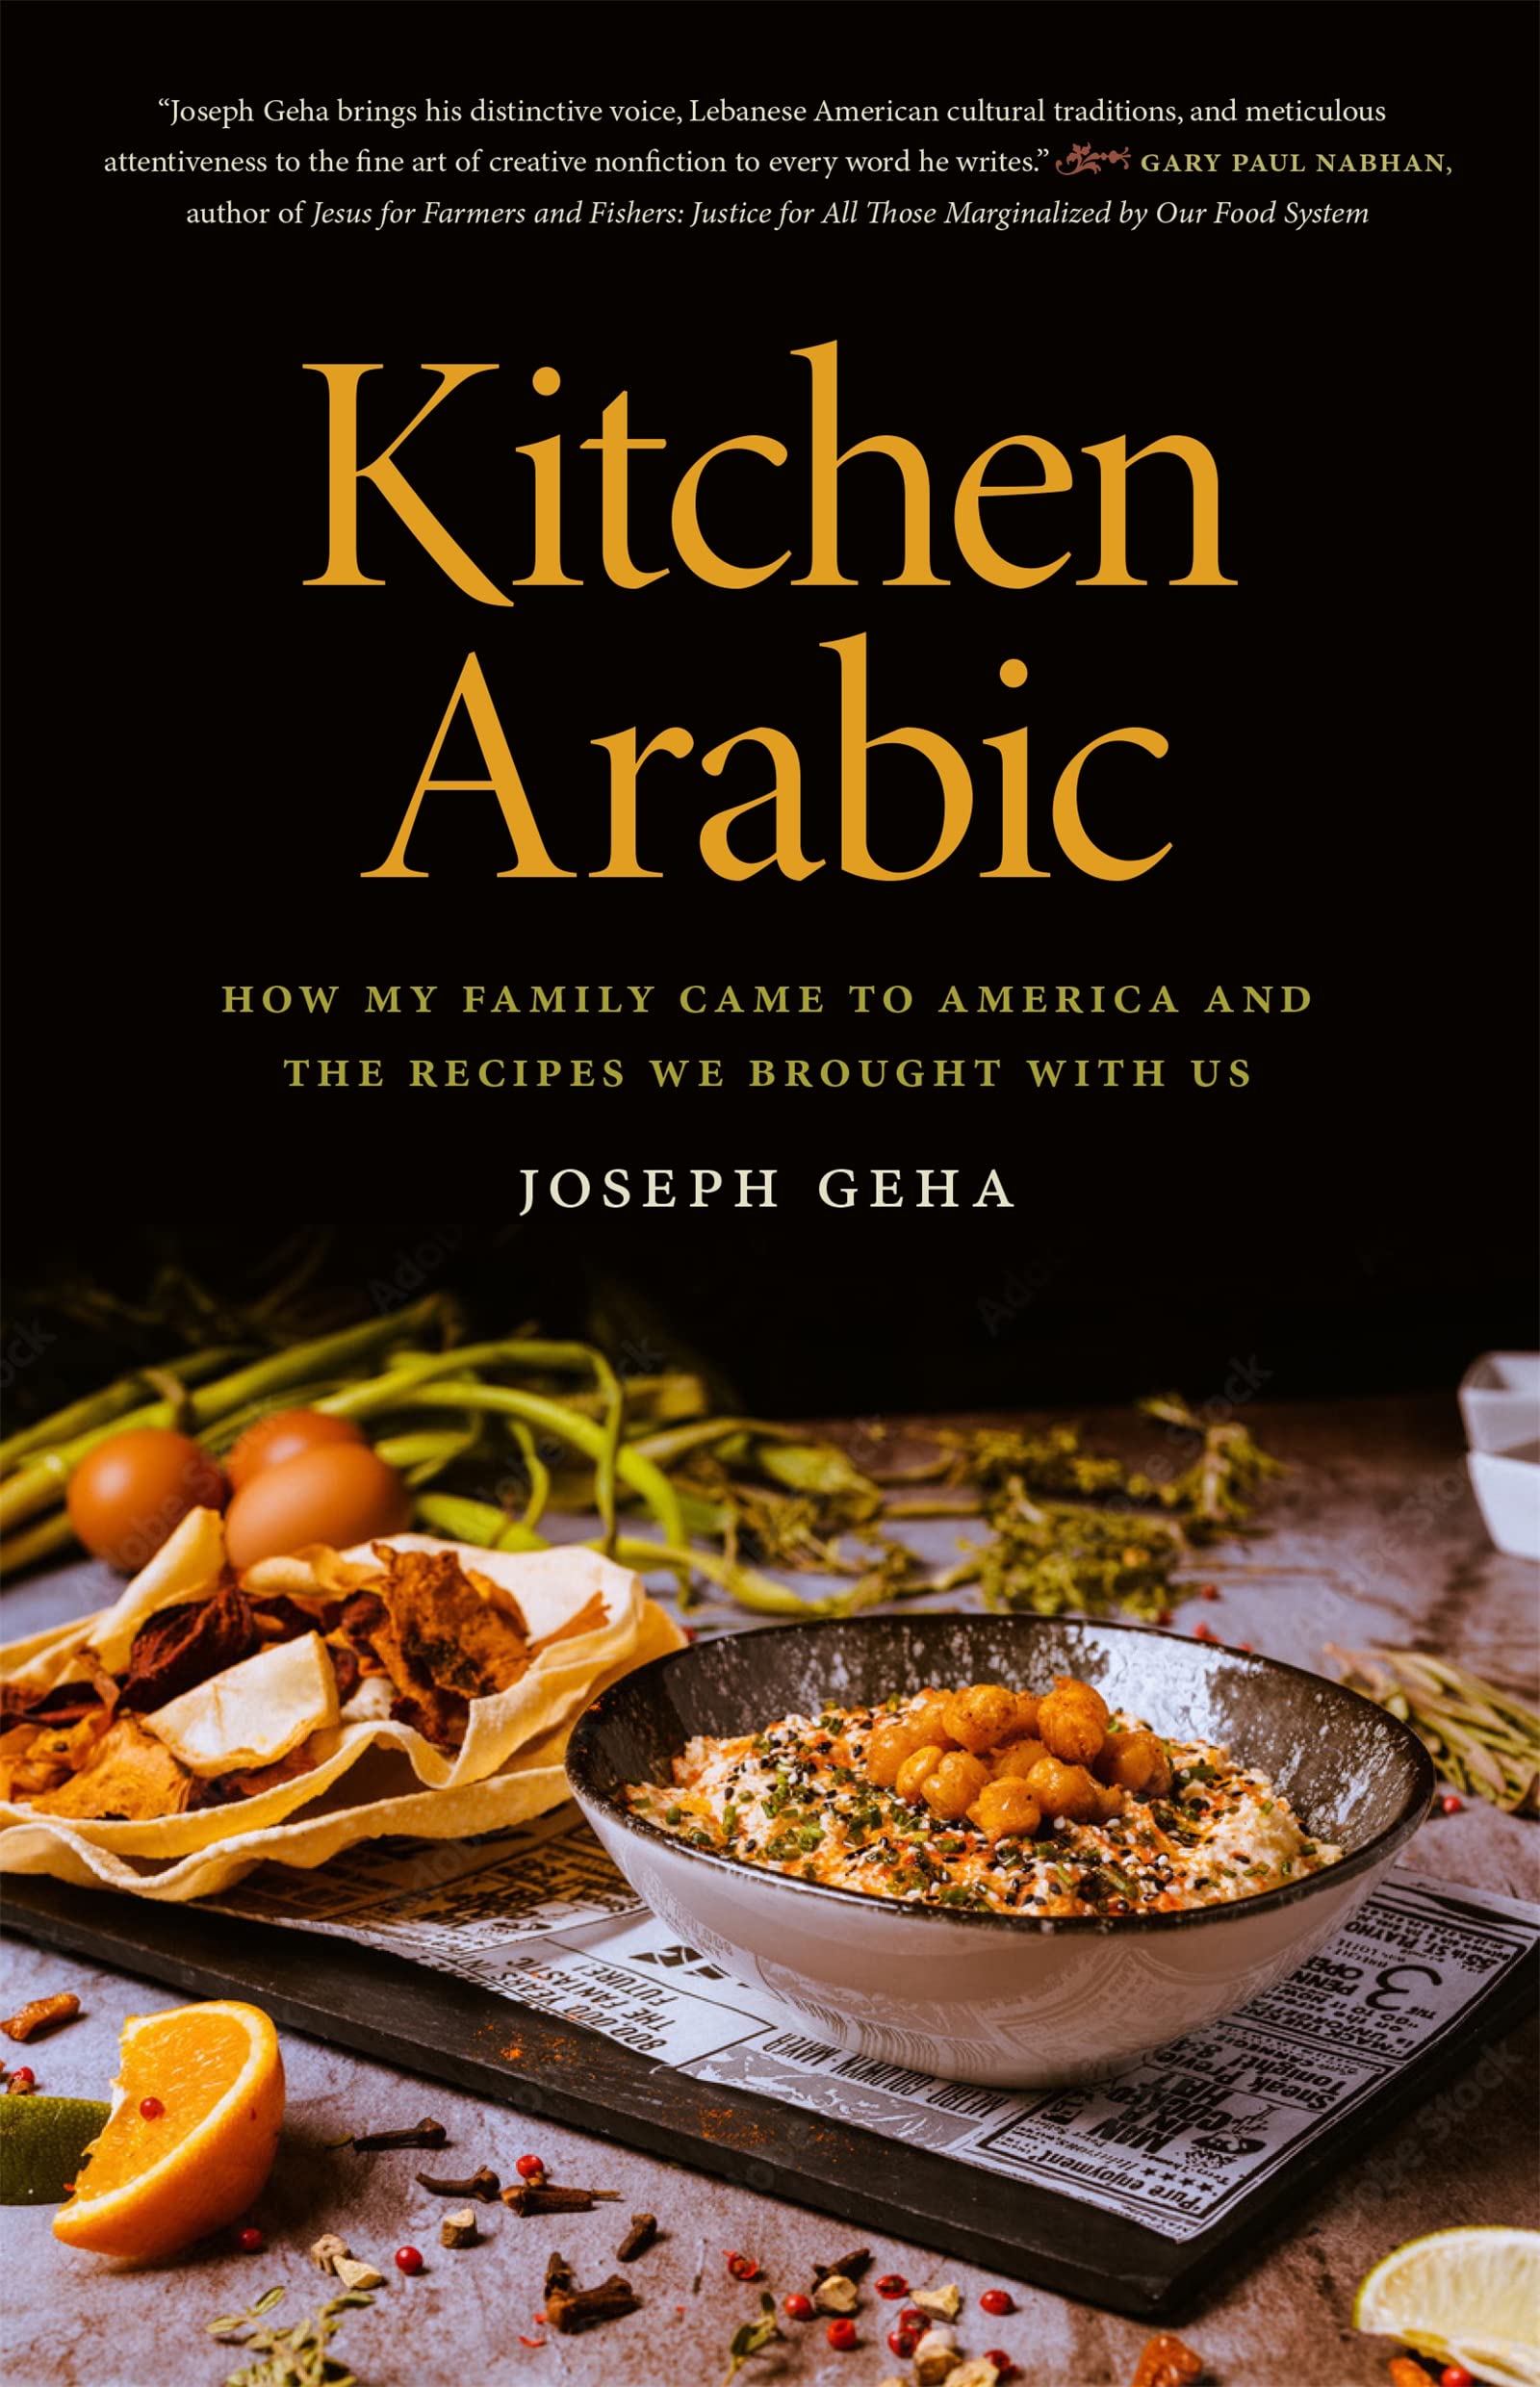 Kitchen Arabic: How My Family Came to America and the Recipes We Brought with Us (Joseph Geha)